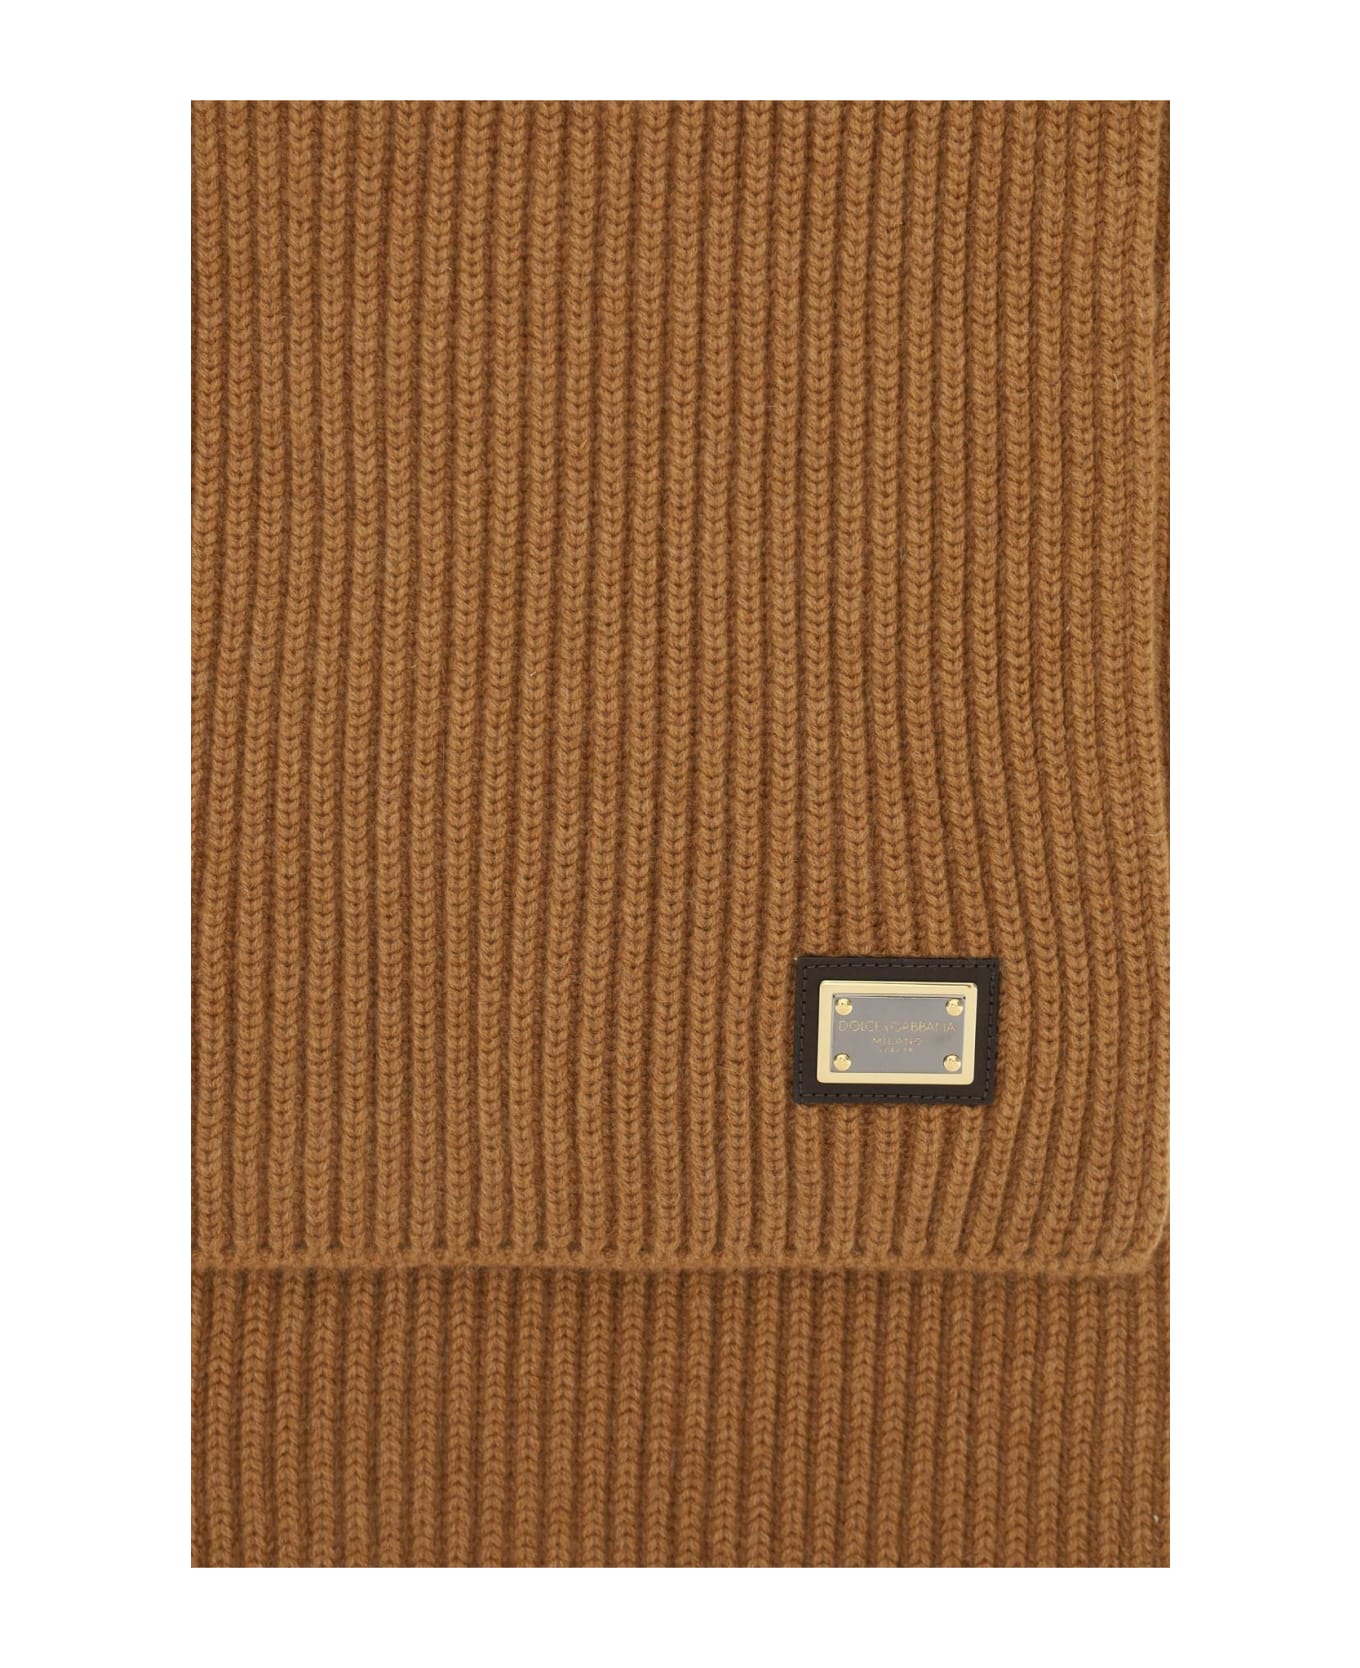 Dolce & Gabbana Ribbed Cashmere Scarf - NOCE (Brown)